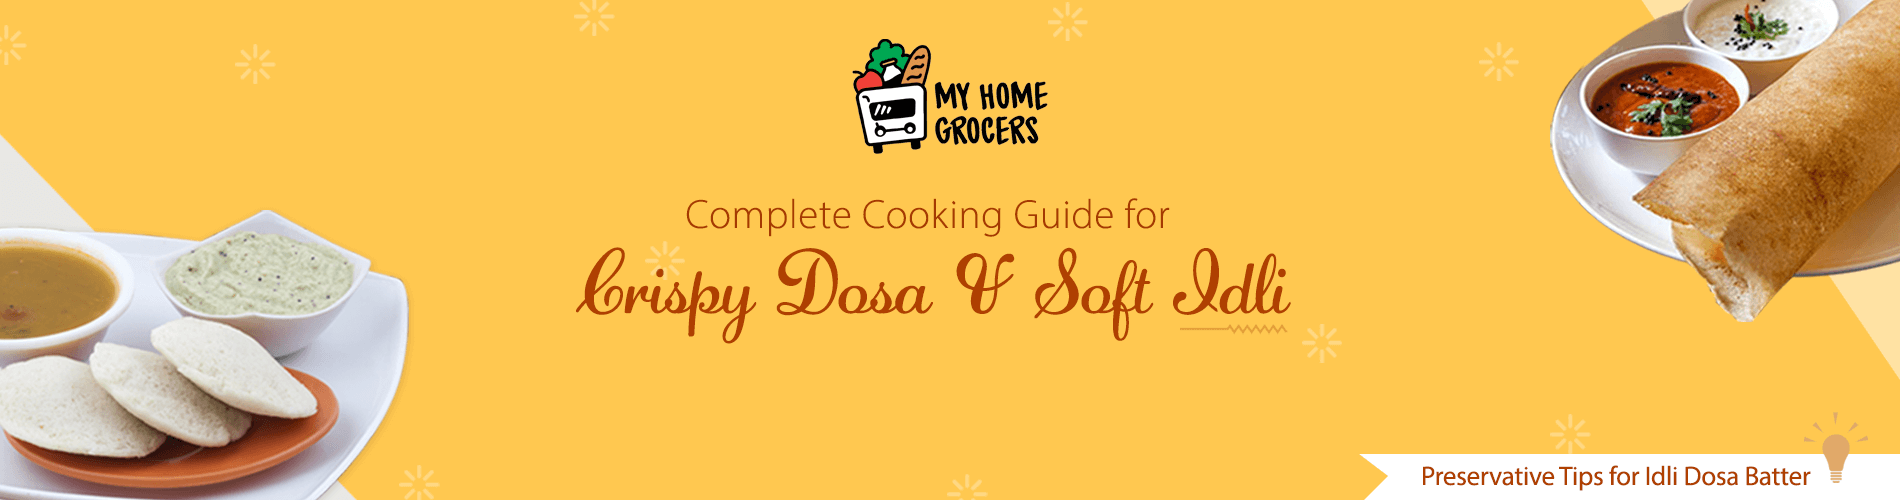 Complete Cooking Guide for Crispy Dosa & Soft Idli 